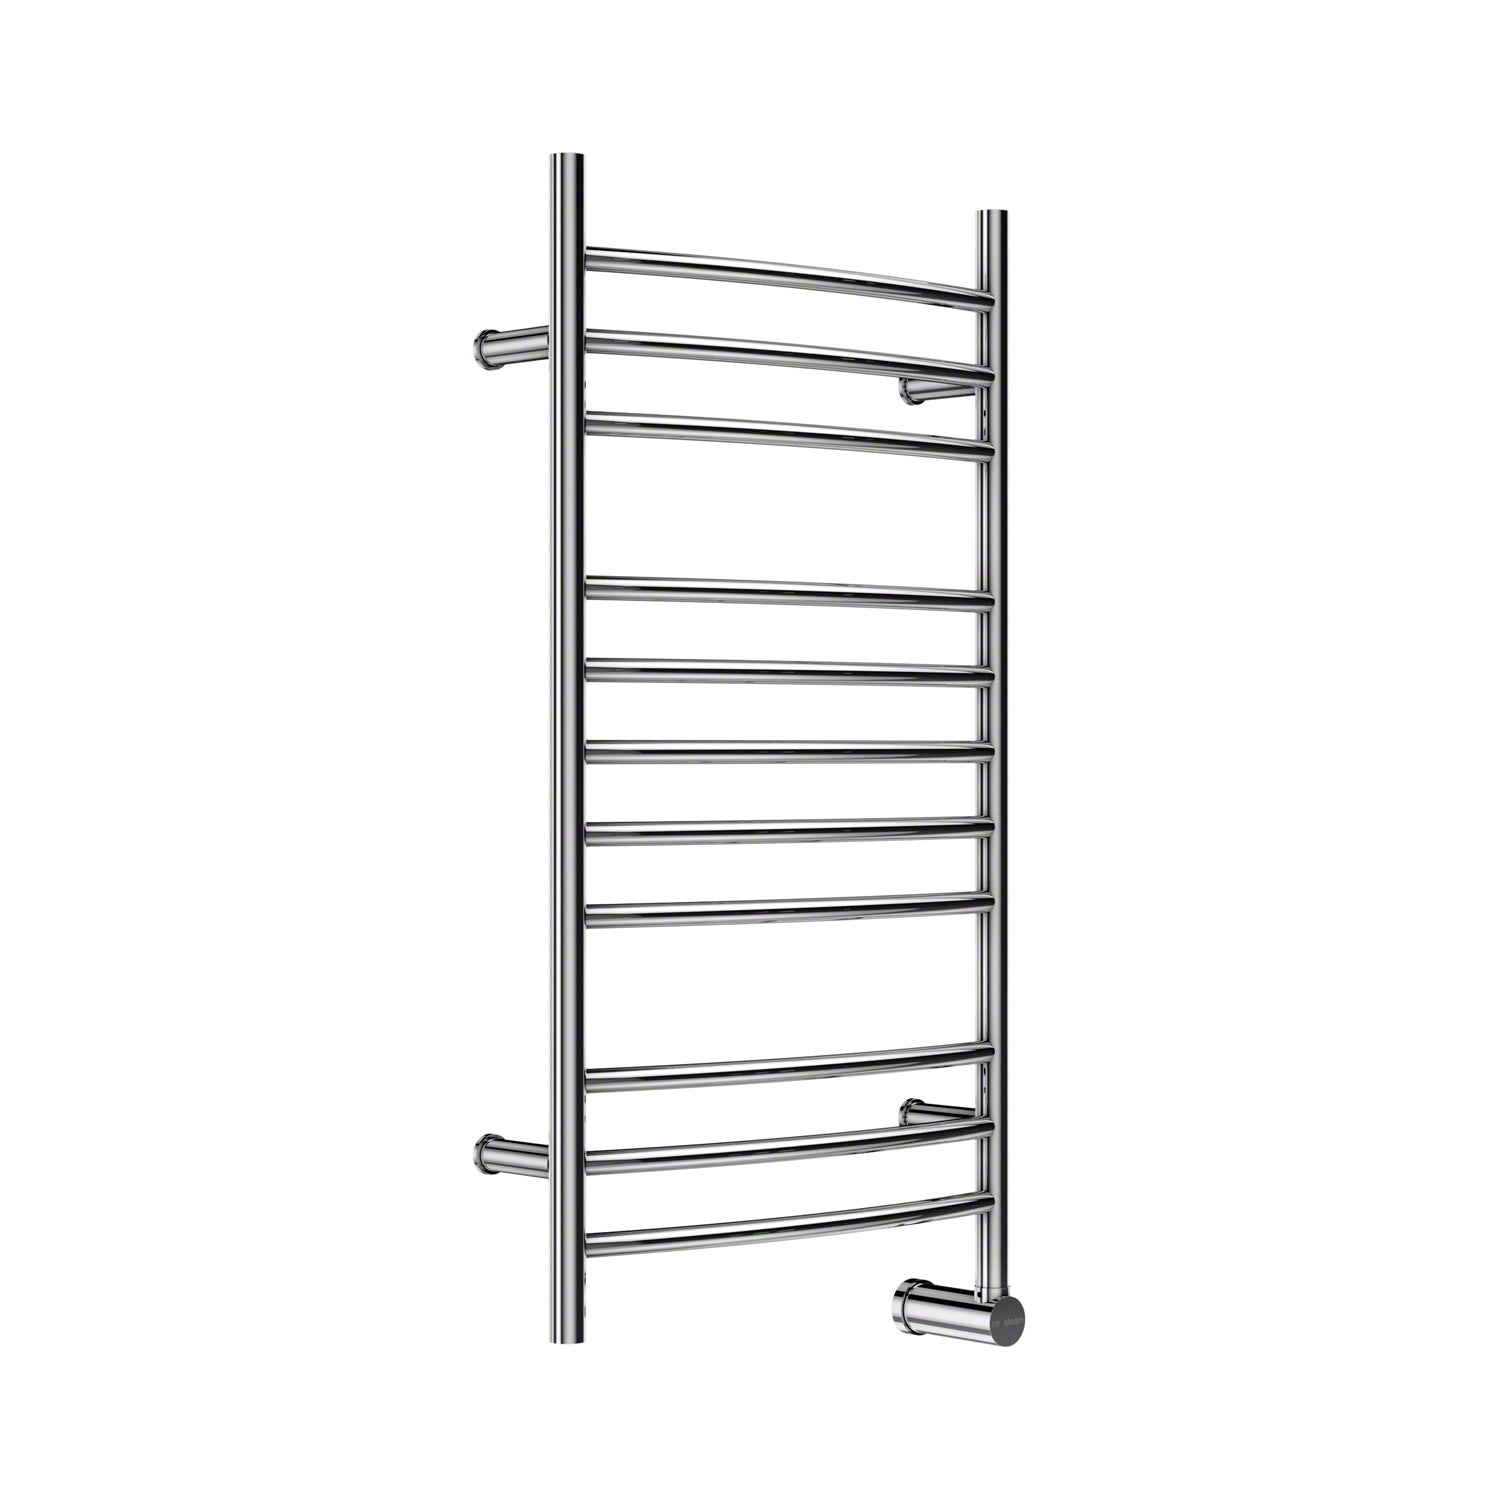 Mr Steam W336T Electric Towel Warmer with Digital Timer Metro Collection